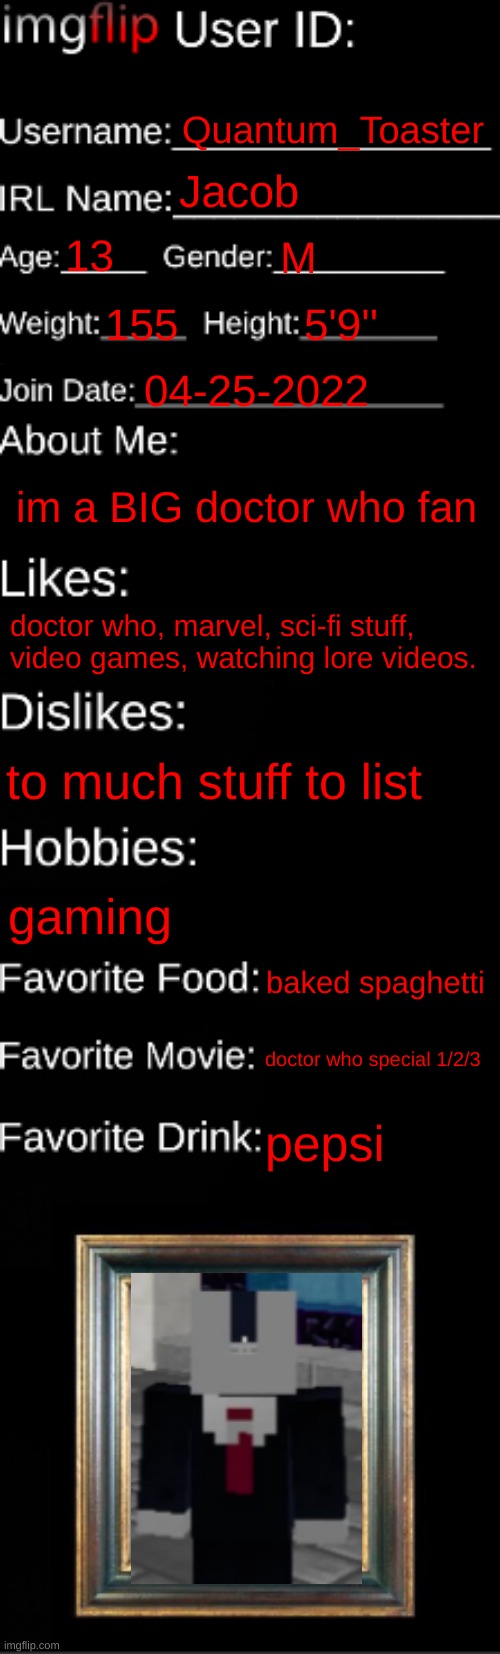 ... | Quantum_Toaster; Jacob; 13; M; 155; 5'9''; 04-25-2022; im a BIG doctor who fan; doctor who, marvel, sci-fi stuff, video games, watching lore videos. to much stuff to list; gaming; baked spaghetti; doctor who special 1/2/3; pepsi | image tagged in imgflip id card | made w/ Imgflip meme maker